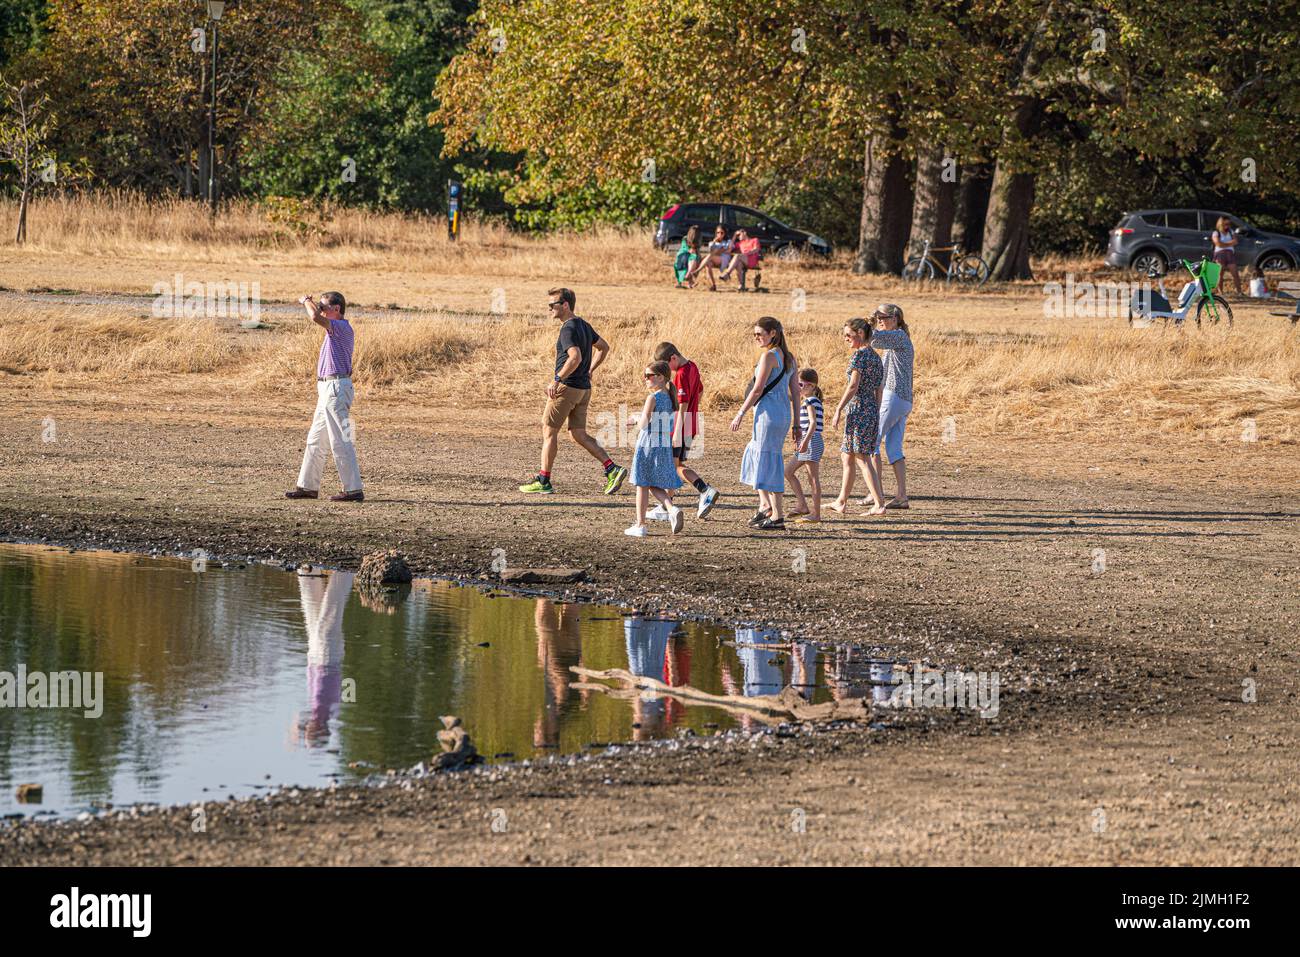 Wimbledon, London, UK. 6 August 2022  People walking  in the afternoon sunshine on the parched  grass of Wimbledon Common  as the hot weather and a lack of rainfall continue to grip much of the south of England and the UK, with temperatures expected to reach  above 30celsius  by next week Credit. amer ghazzal/Alamy Live News Stock Photo